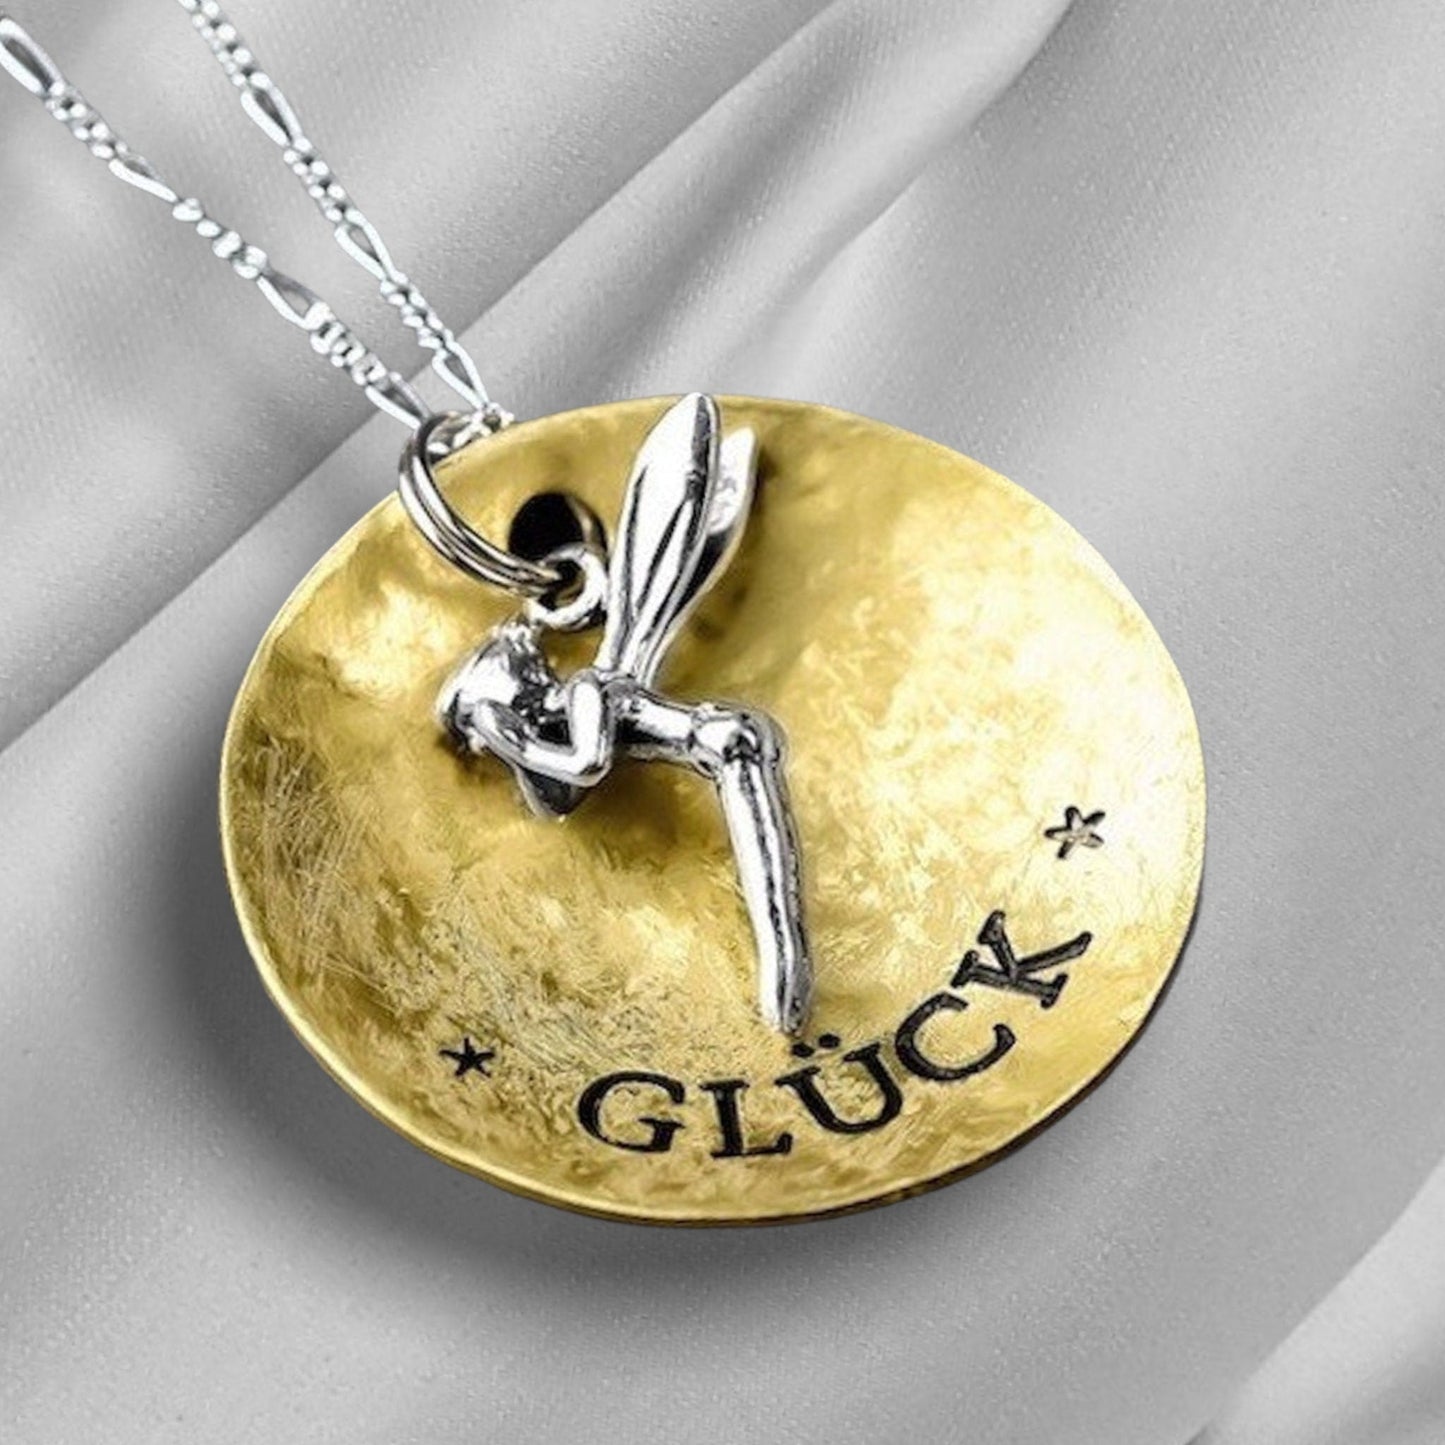 Happiness engraving chain with fairy pendant - 925 sterling silver lucky charm engraving chain - K925-91